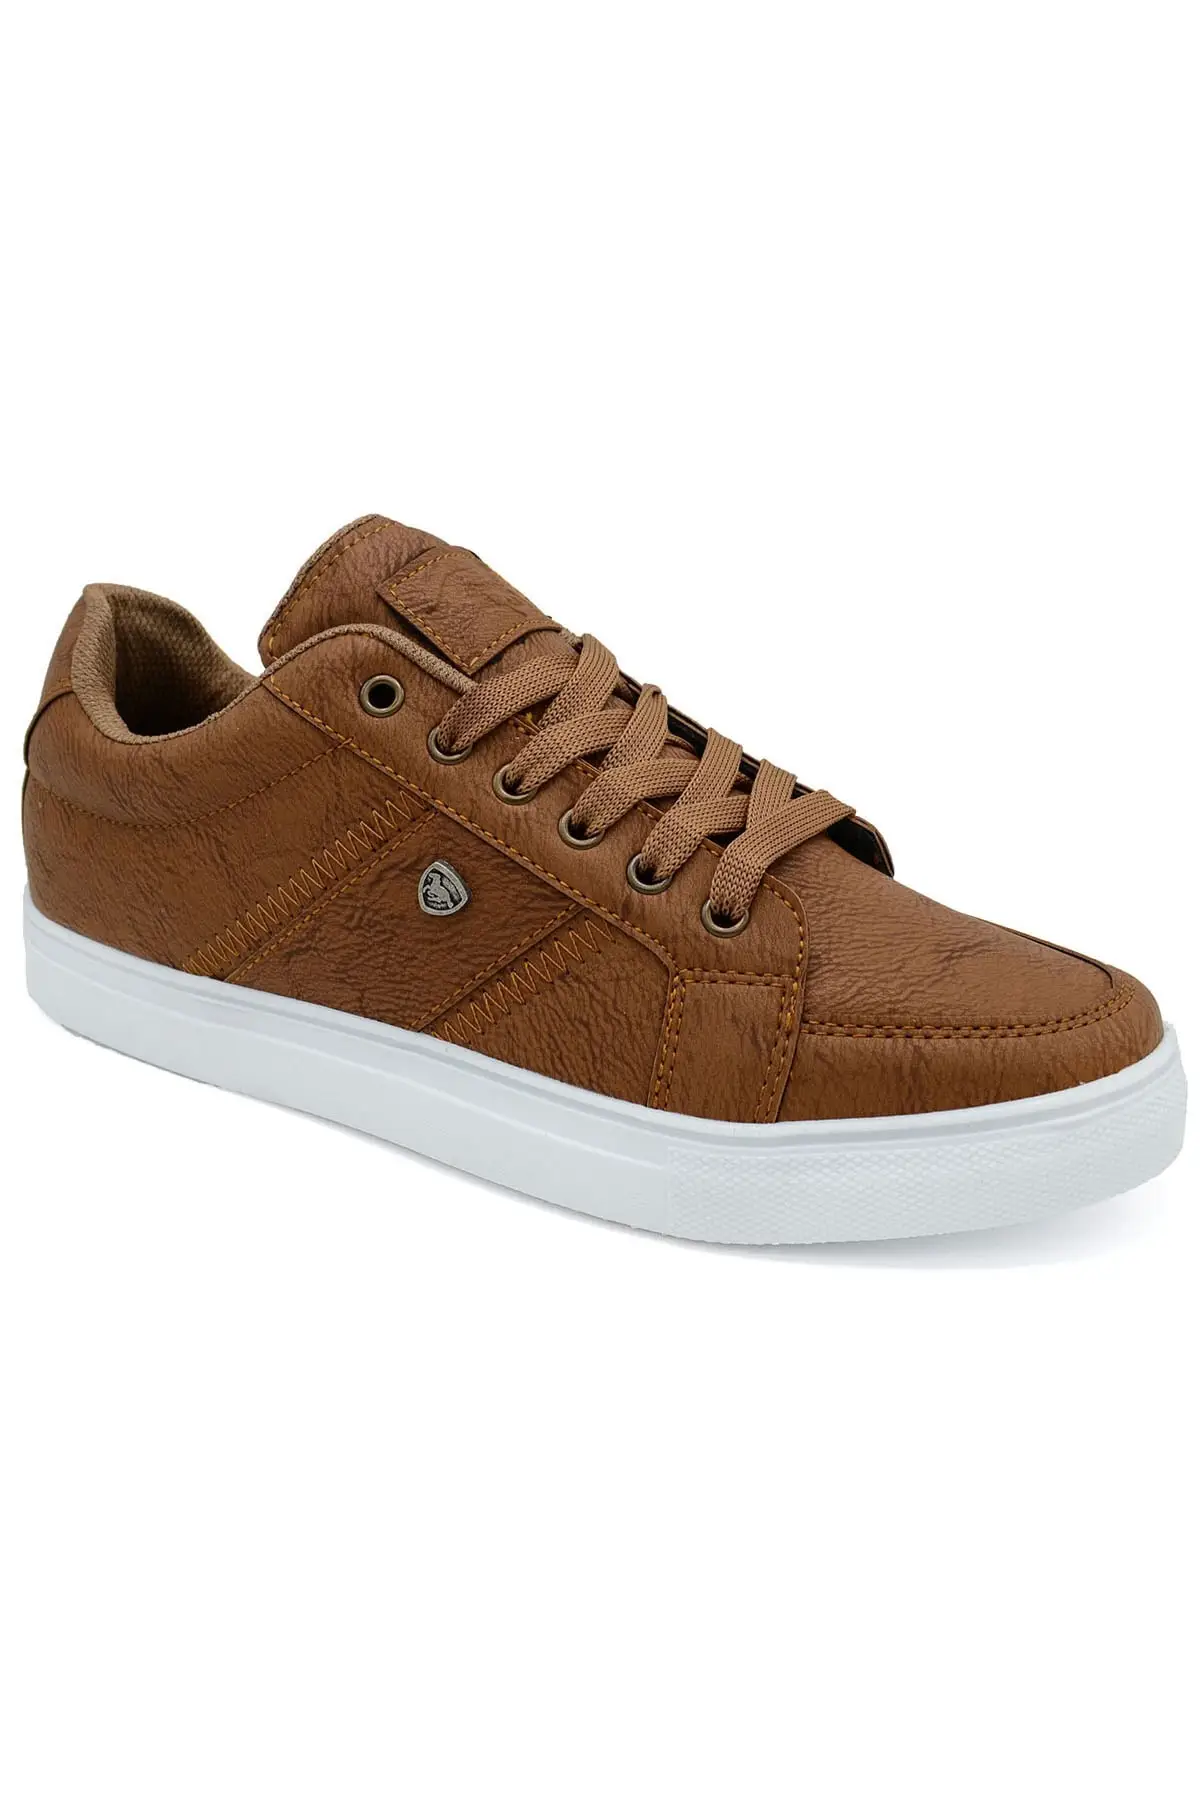 011 male Sport Shoes Red Brown Elegant Casual Comfortable Showy Fashion Daily Wearable